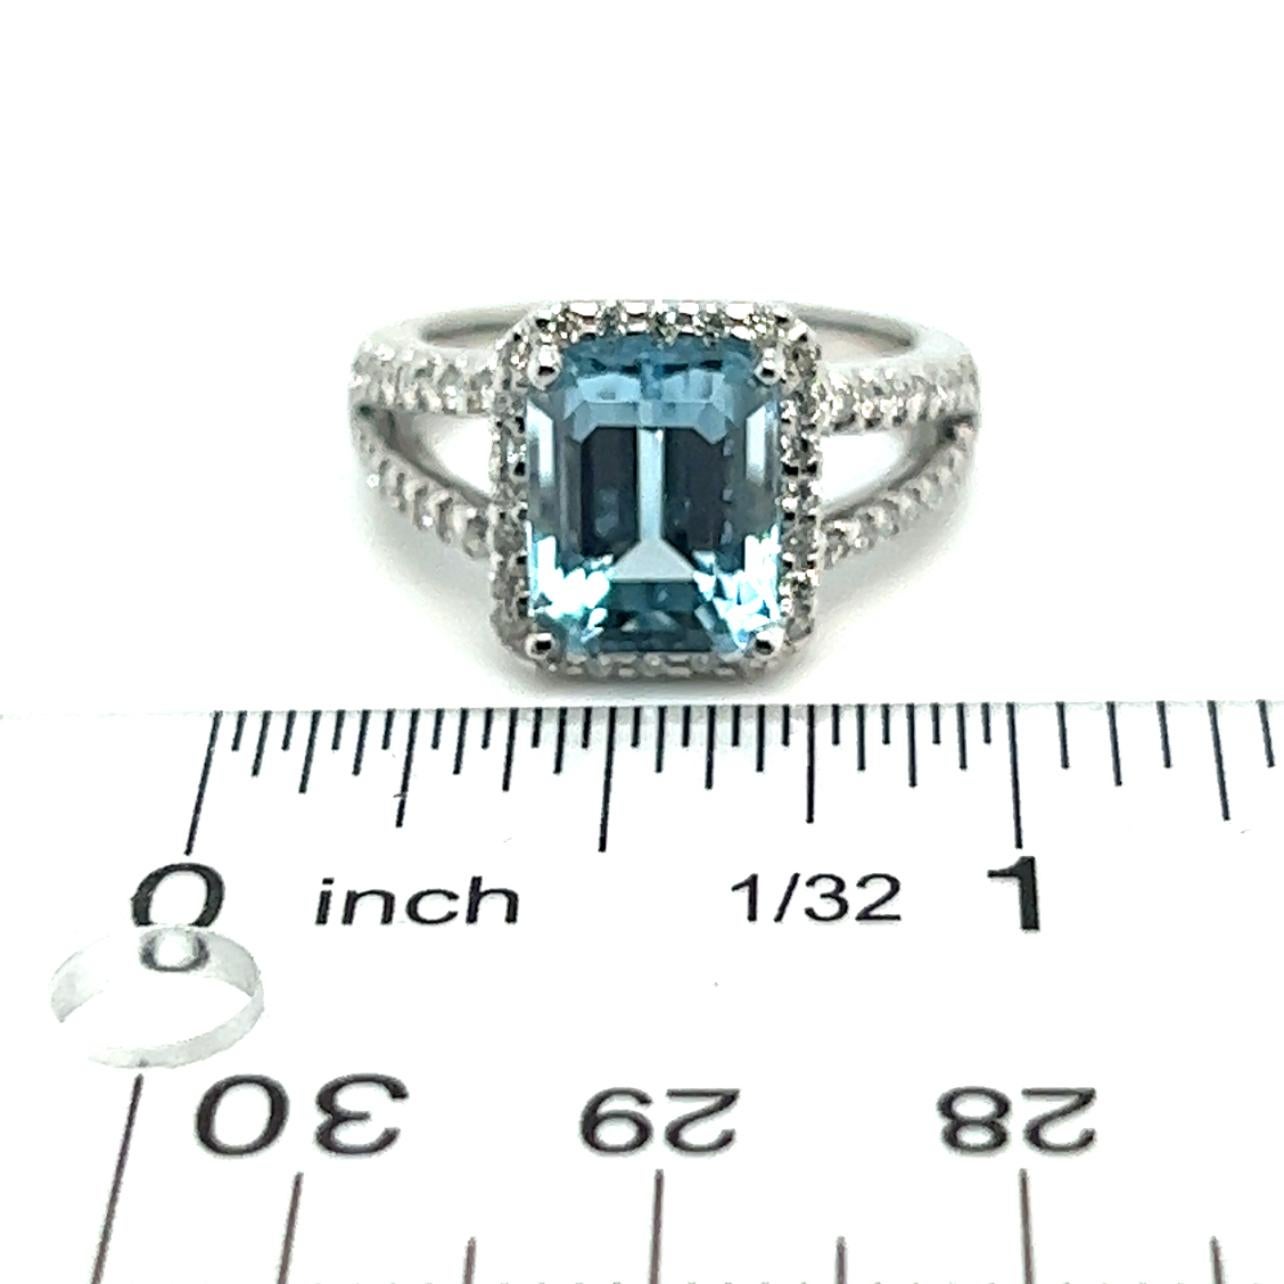 Emerald Cut Natural Topaz Diamond Ring 6.5 14k W Gold 5.17 TCW Certified For Sale